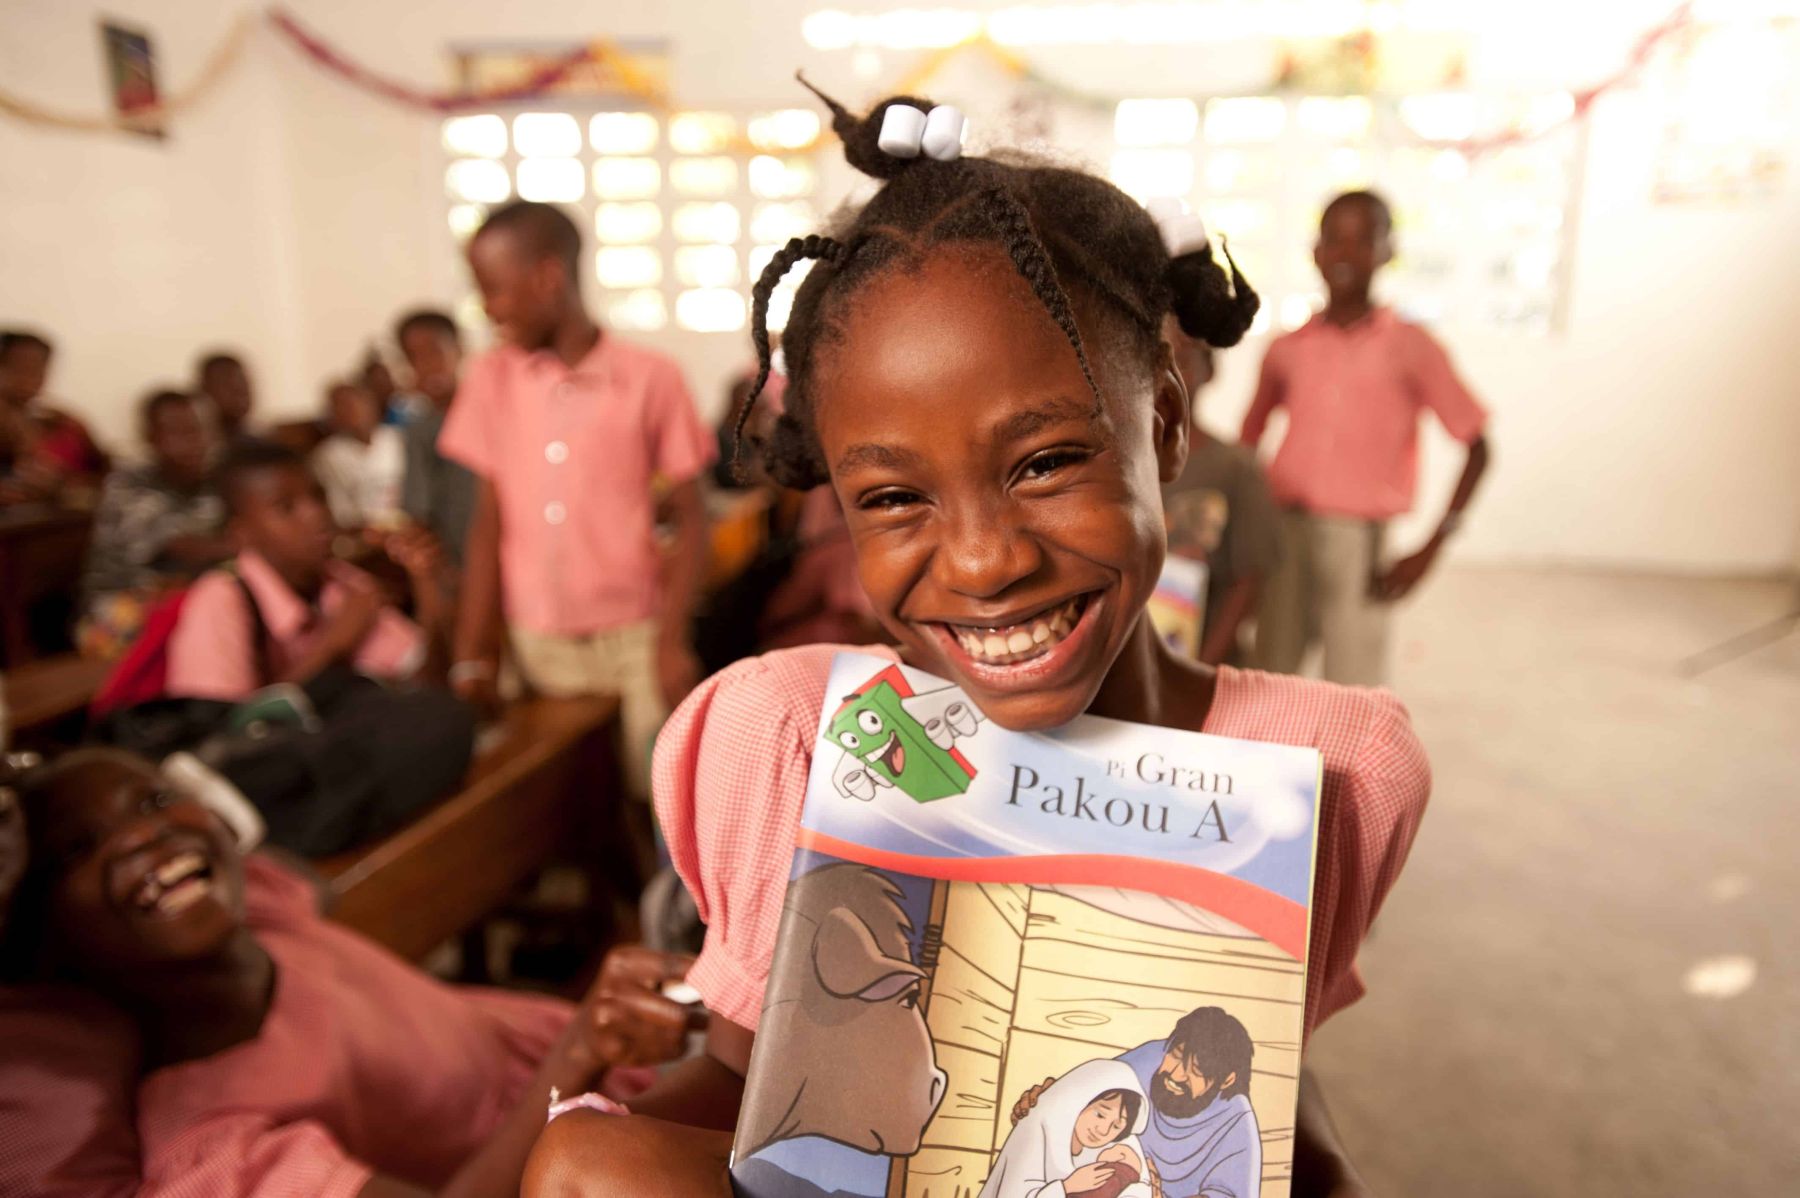 The Greatest Journey is a 12-lesson discipleship course designed for Operation Christmas Child shoebox recipients. Children who participate in the program learn how to follow Christ and share Him with others. As they do, entire families and communities are transformed by the power of the Gospel, and churches are started.